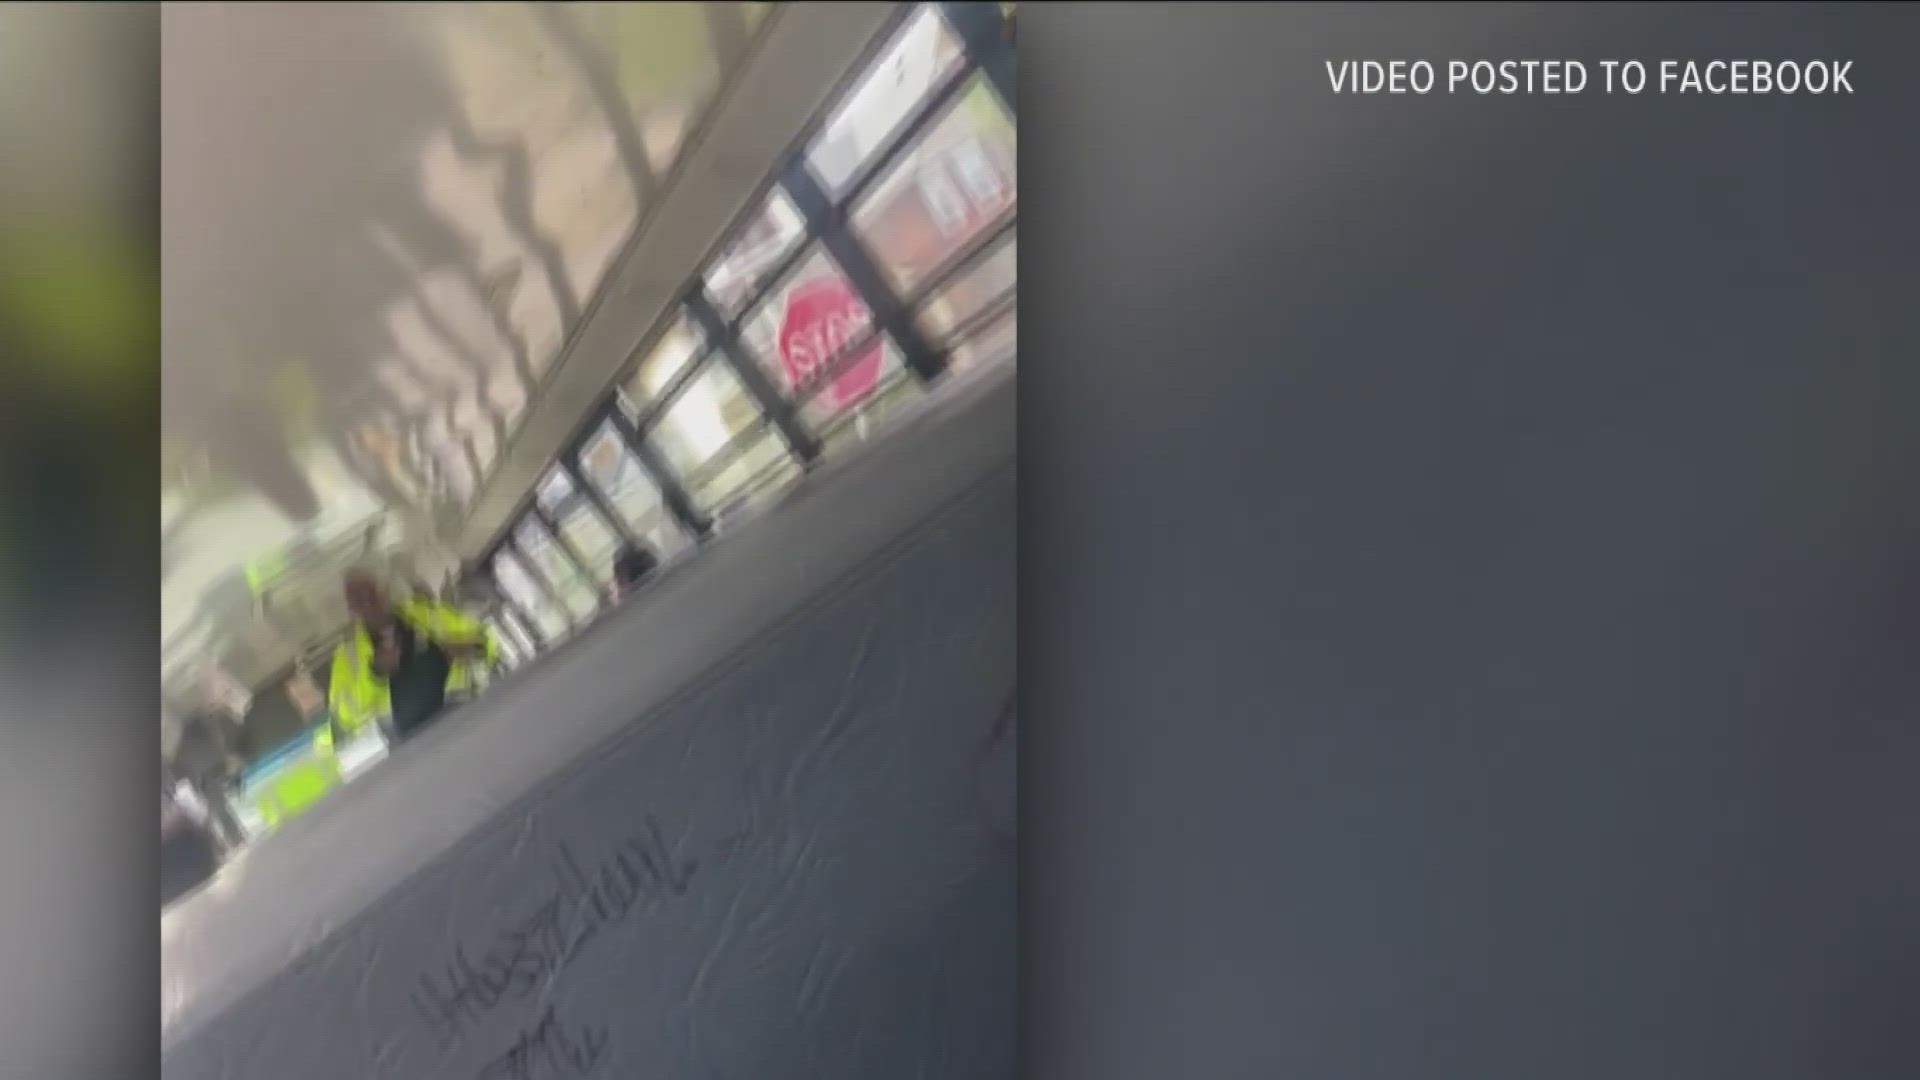 A bus driver for the Buffalo public school district has been fired after making disturbing remarks on camera